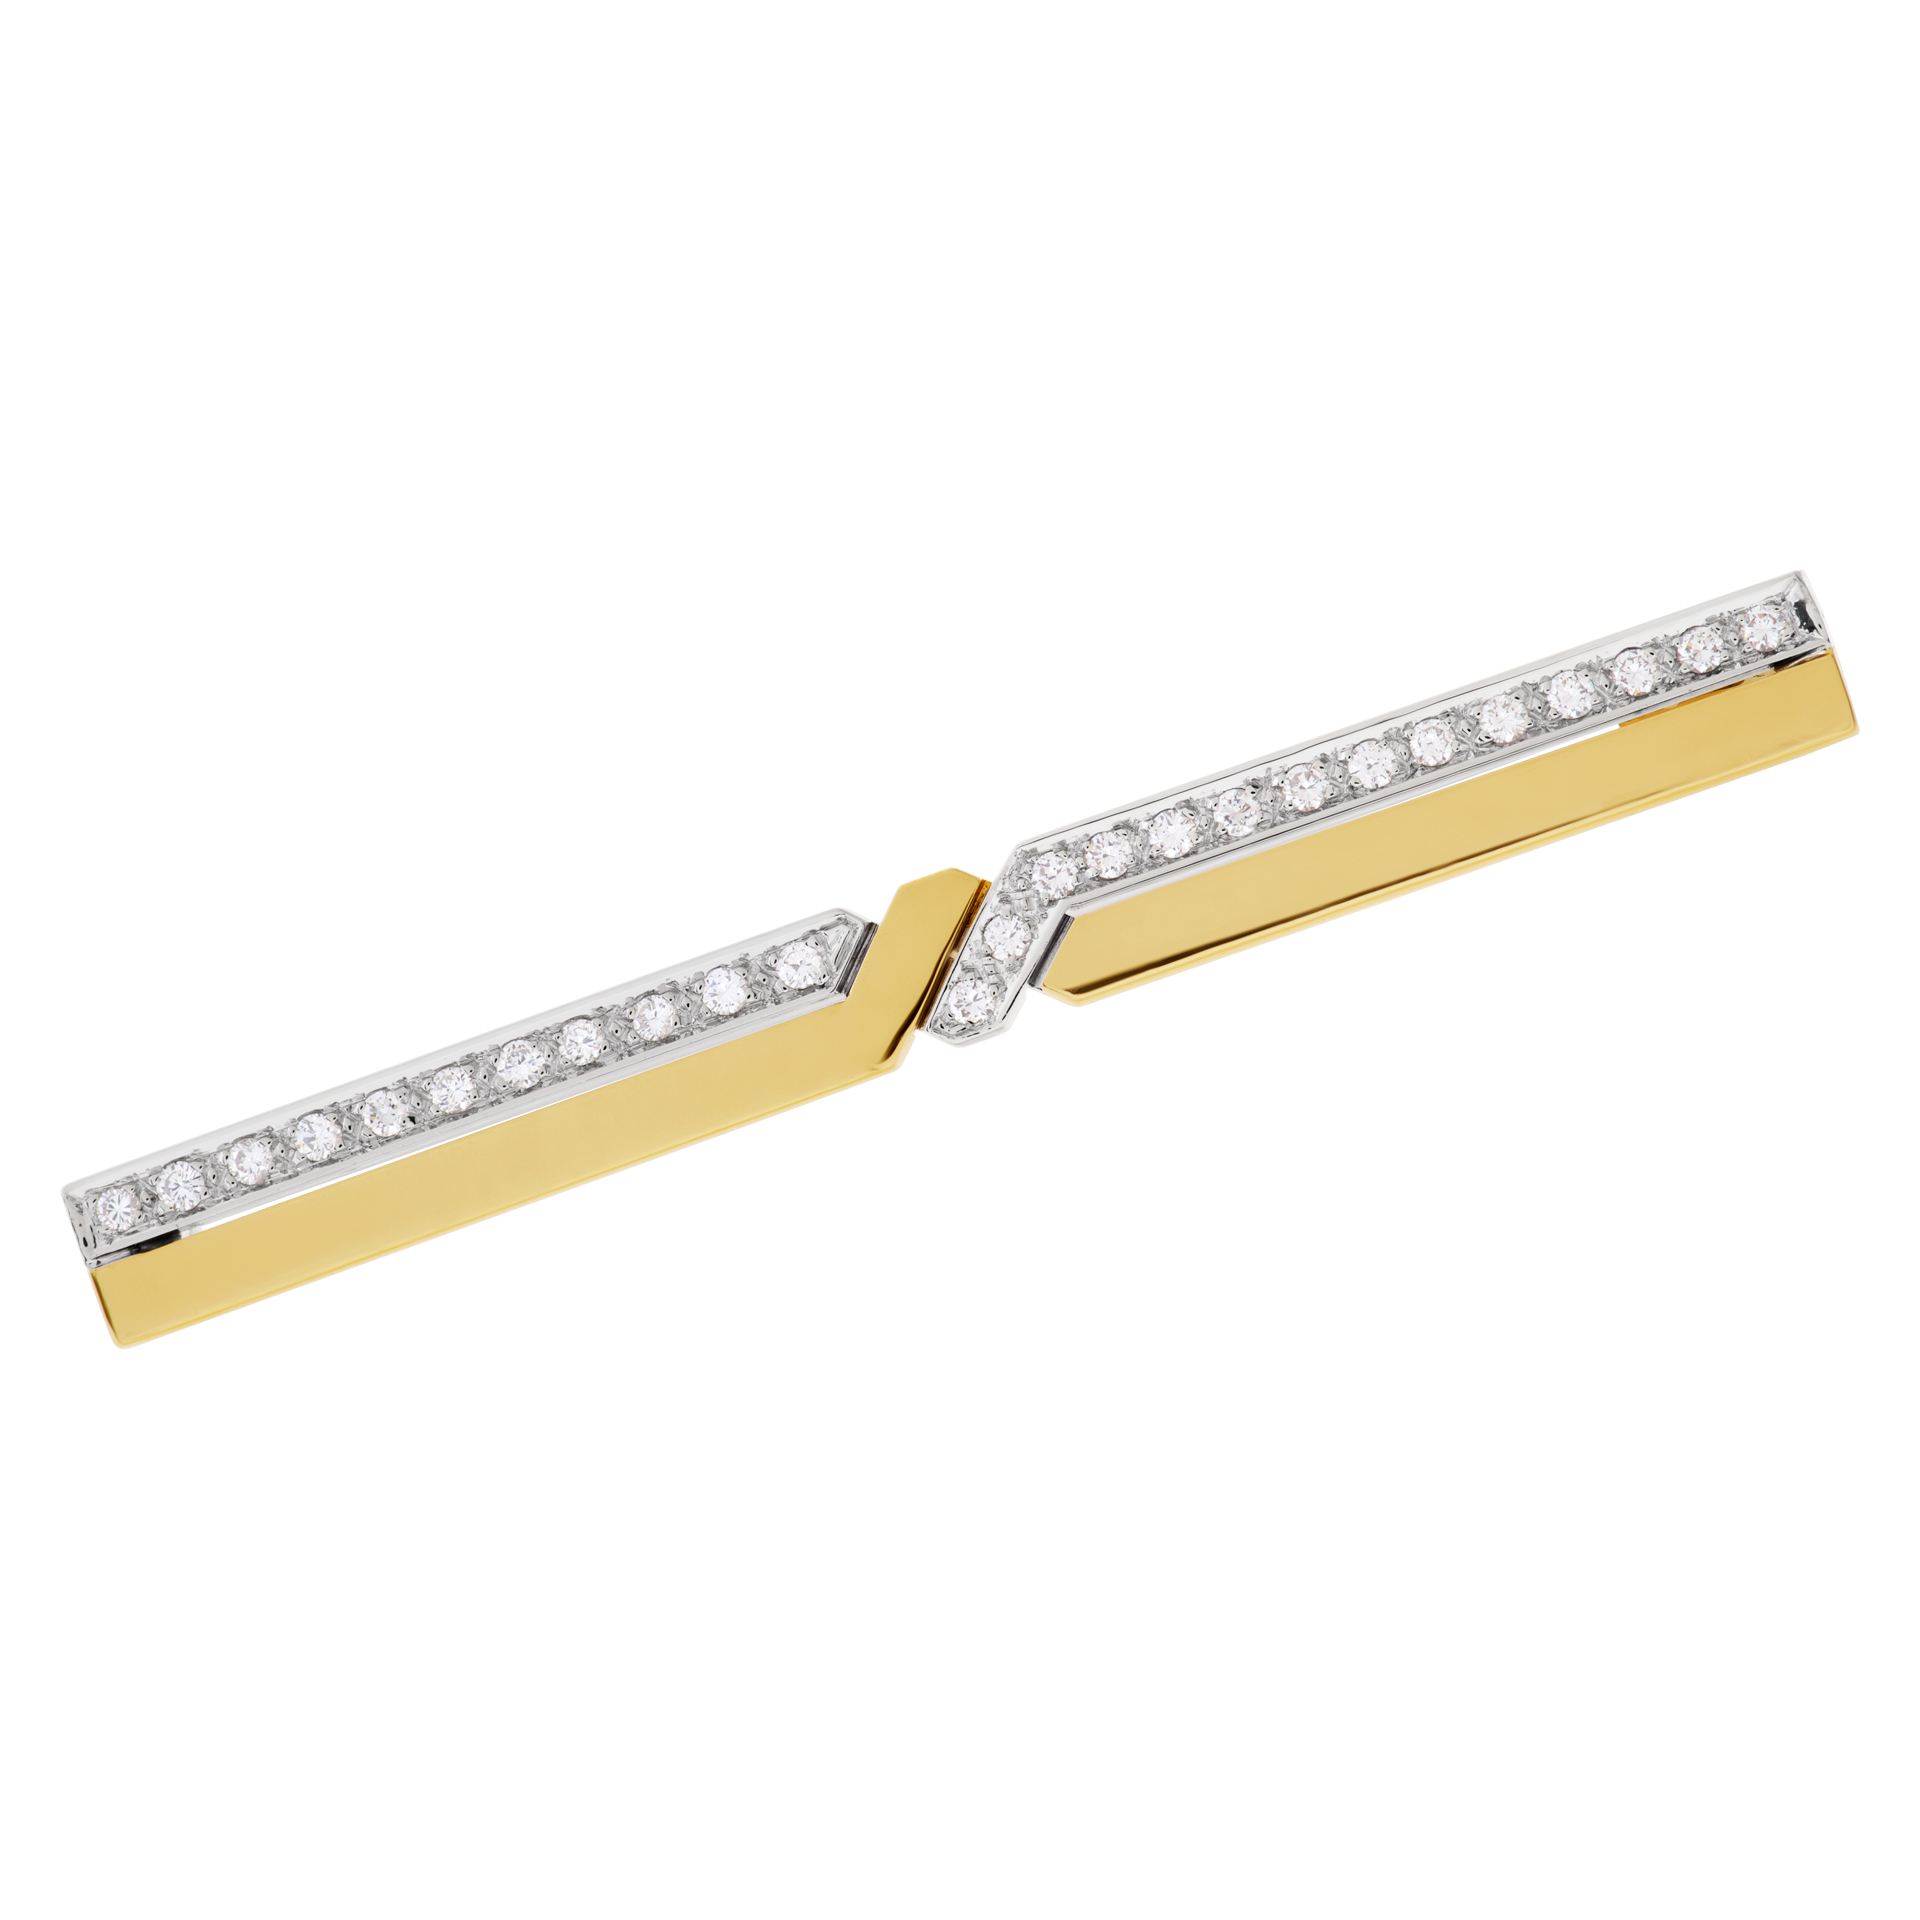 Pomellato Lightning Bolt Pin In 18k White & Yellow Gold With App 0.75 Cts In Diamonds image 1